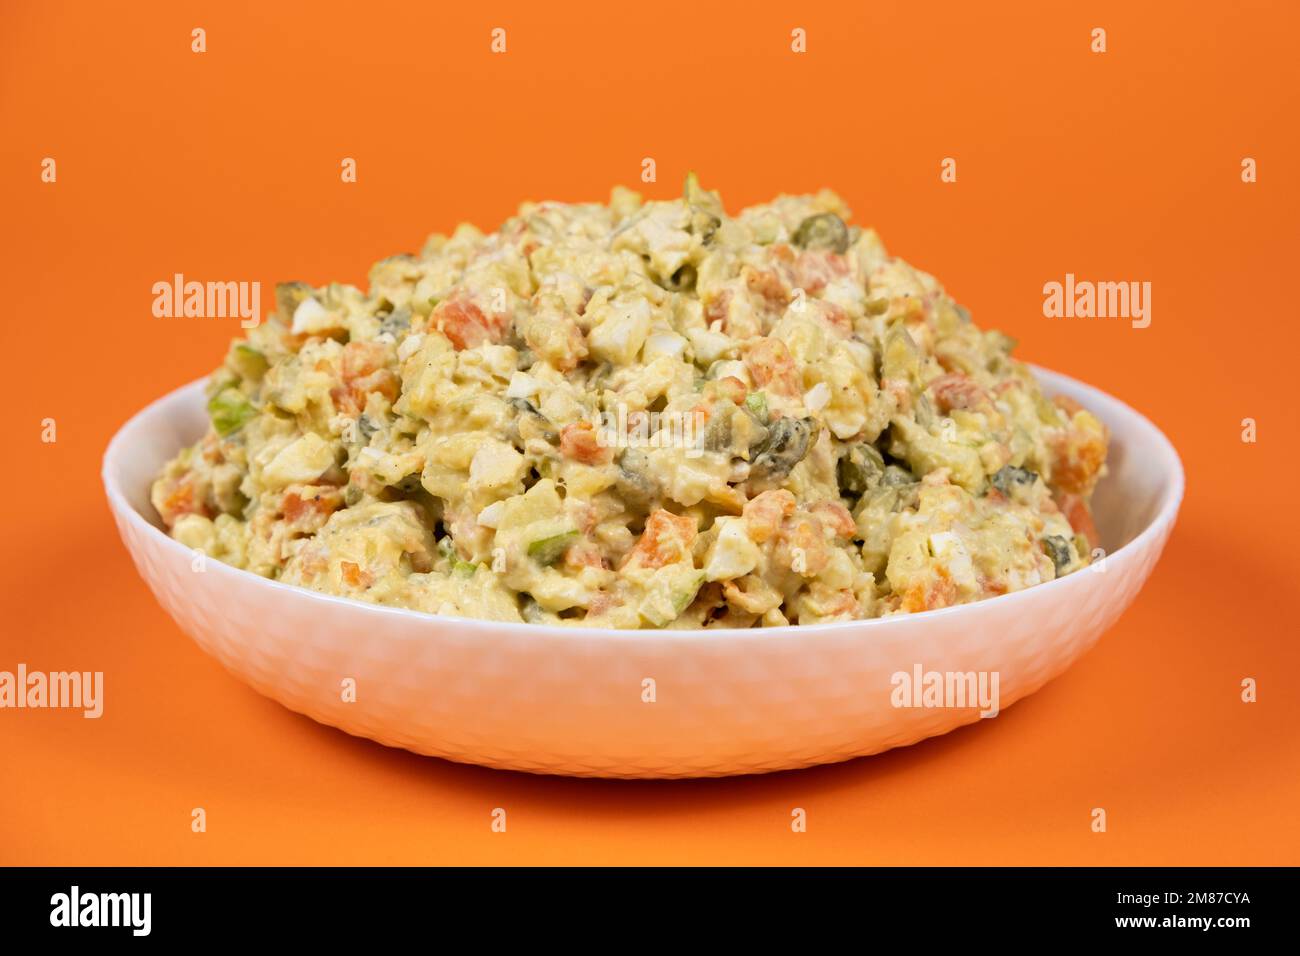 Olivier russian salad in a plate on an orange background close-up. Stock Photo